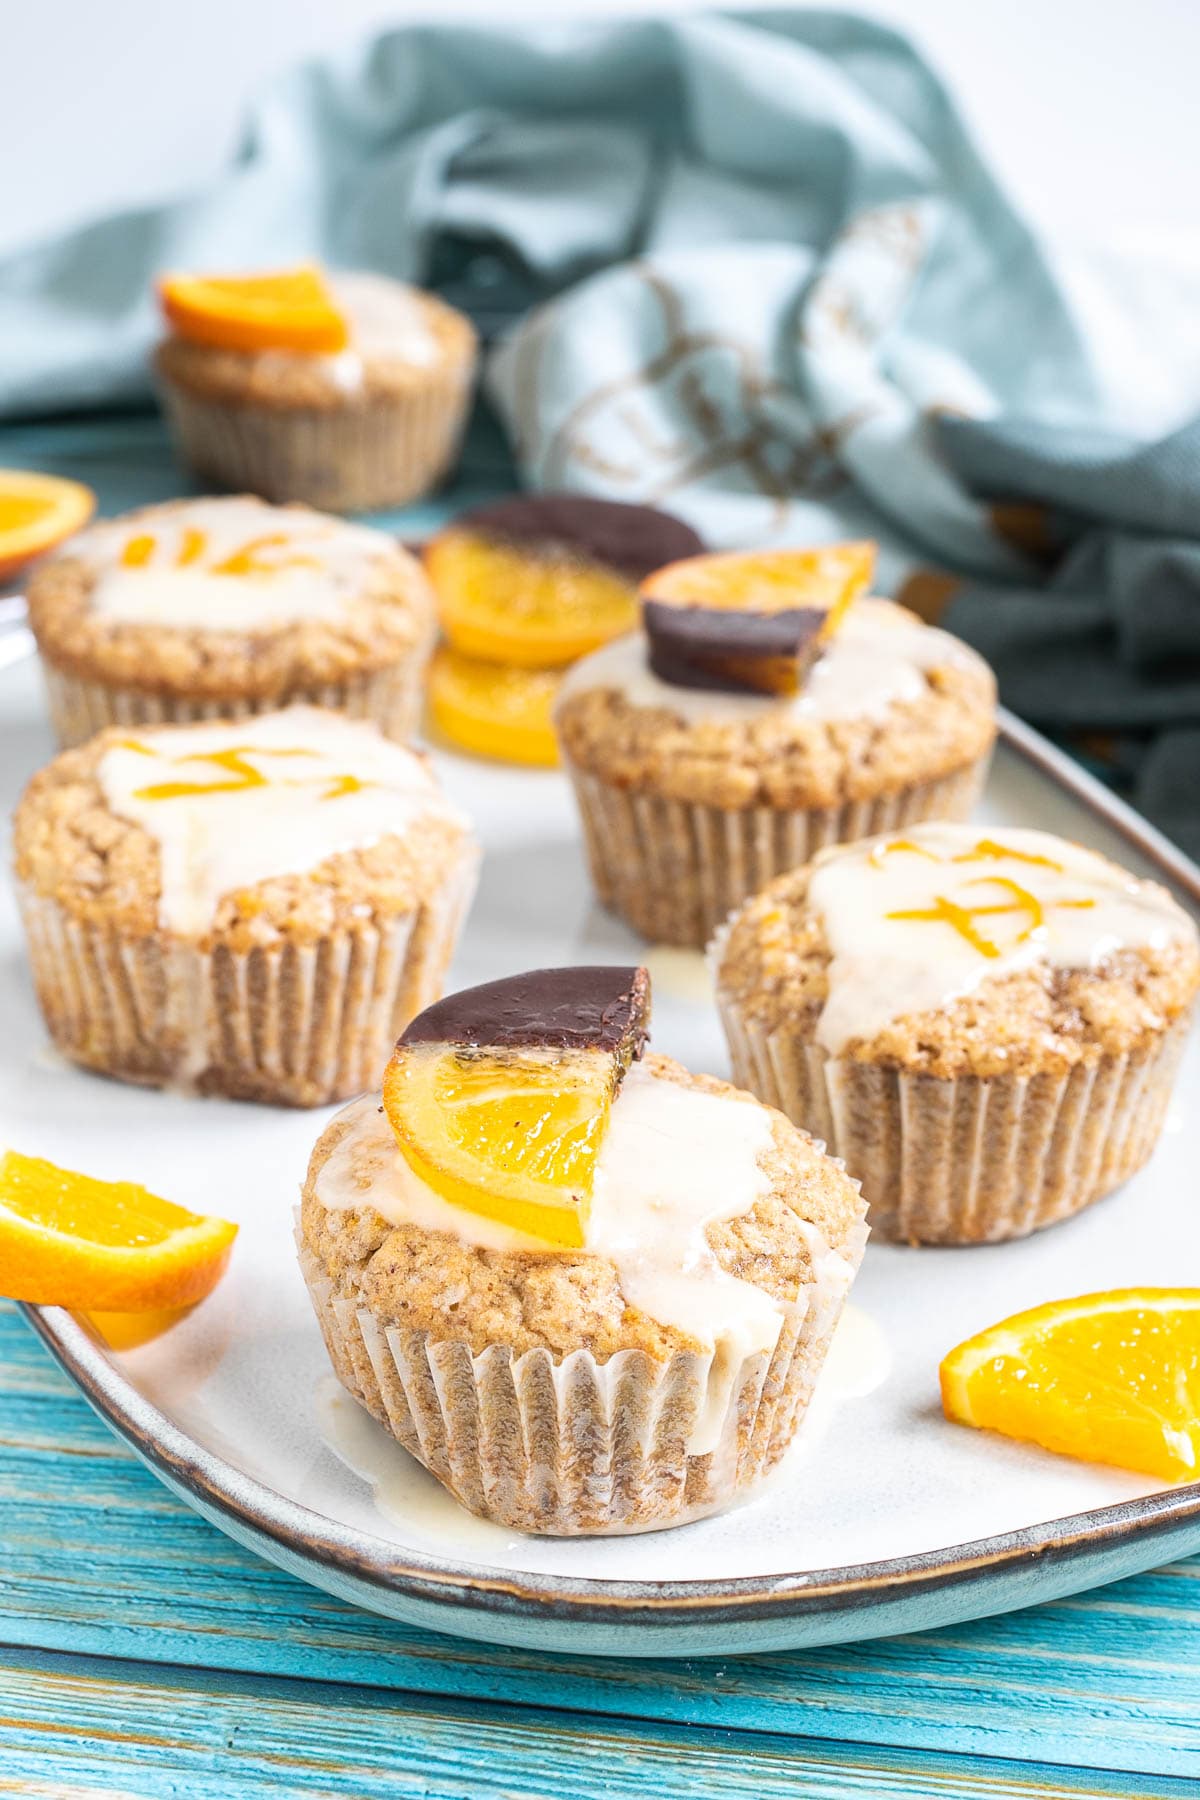 Several orange muffins on a light blue plate topped with a white glaze and orange slices partly dipped in chocolate or white glaze with orange zest pieces. Orange slices are scattered around them.